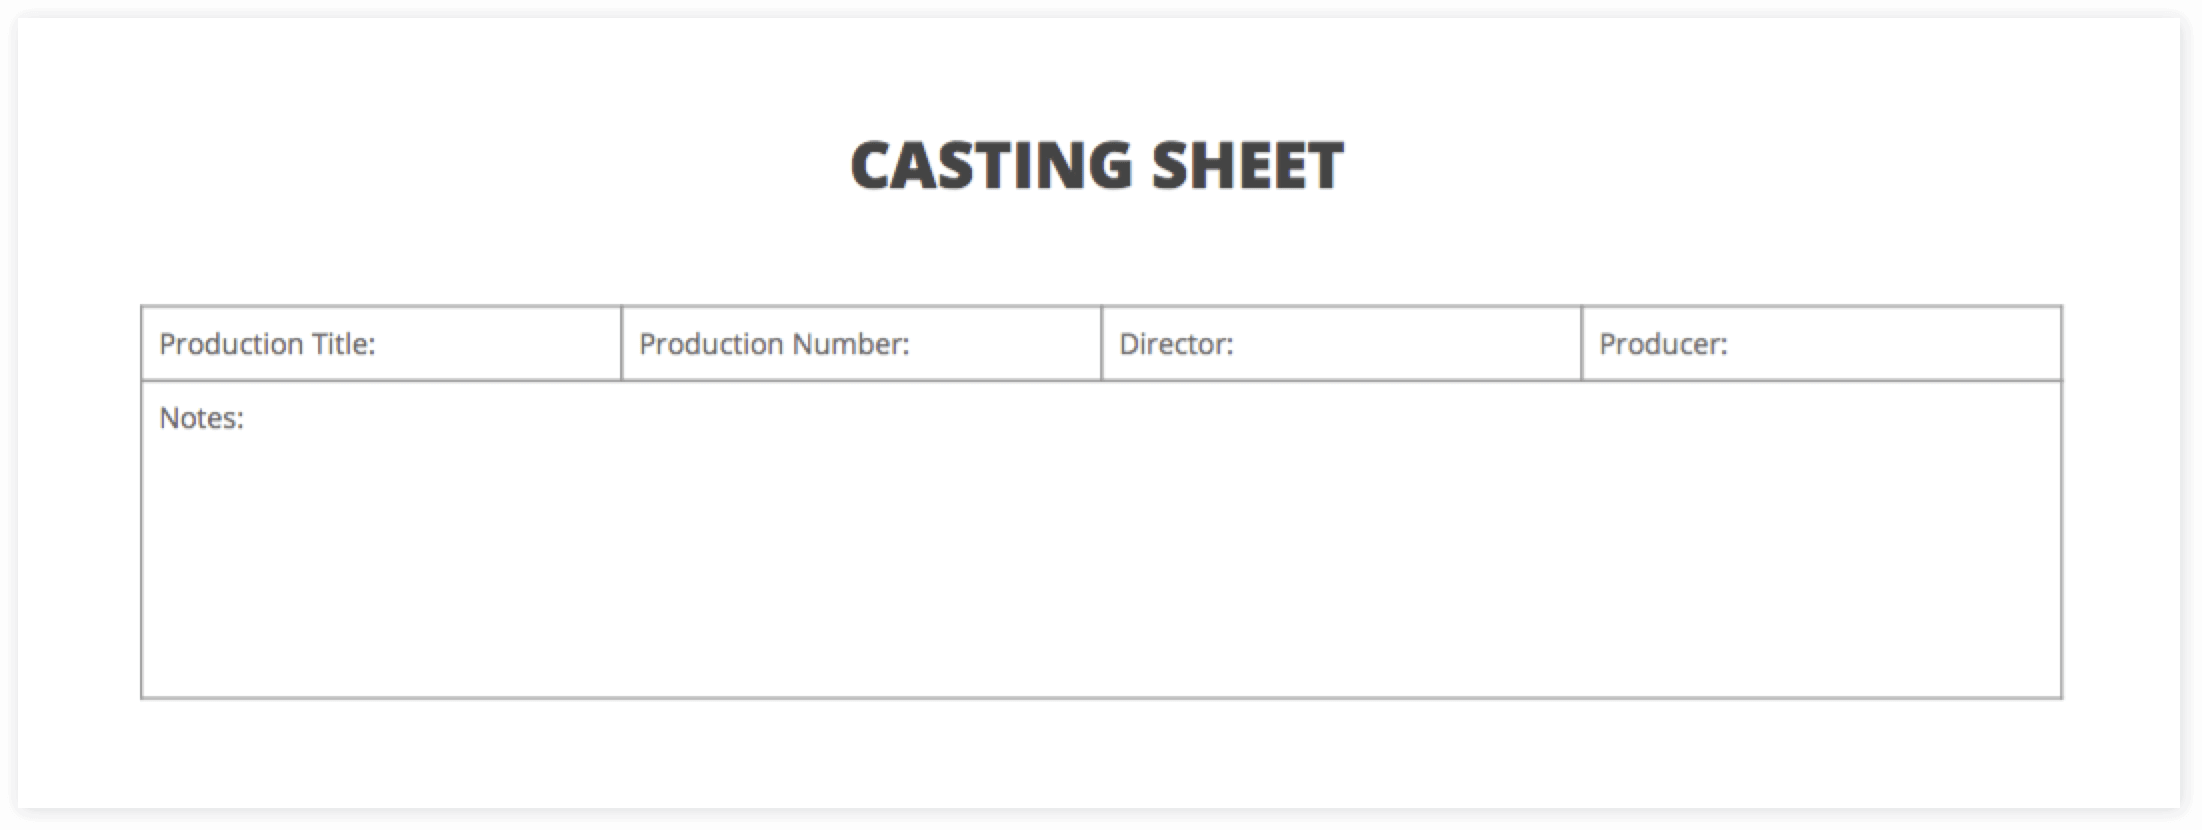 The Ultimate Guide to Casting Auditions (with FREE Casting Sheet Template) - Casting Sheet Top Half